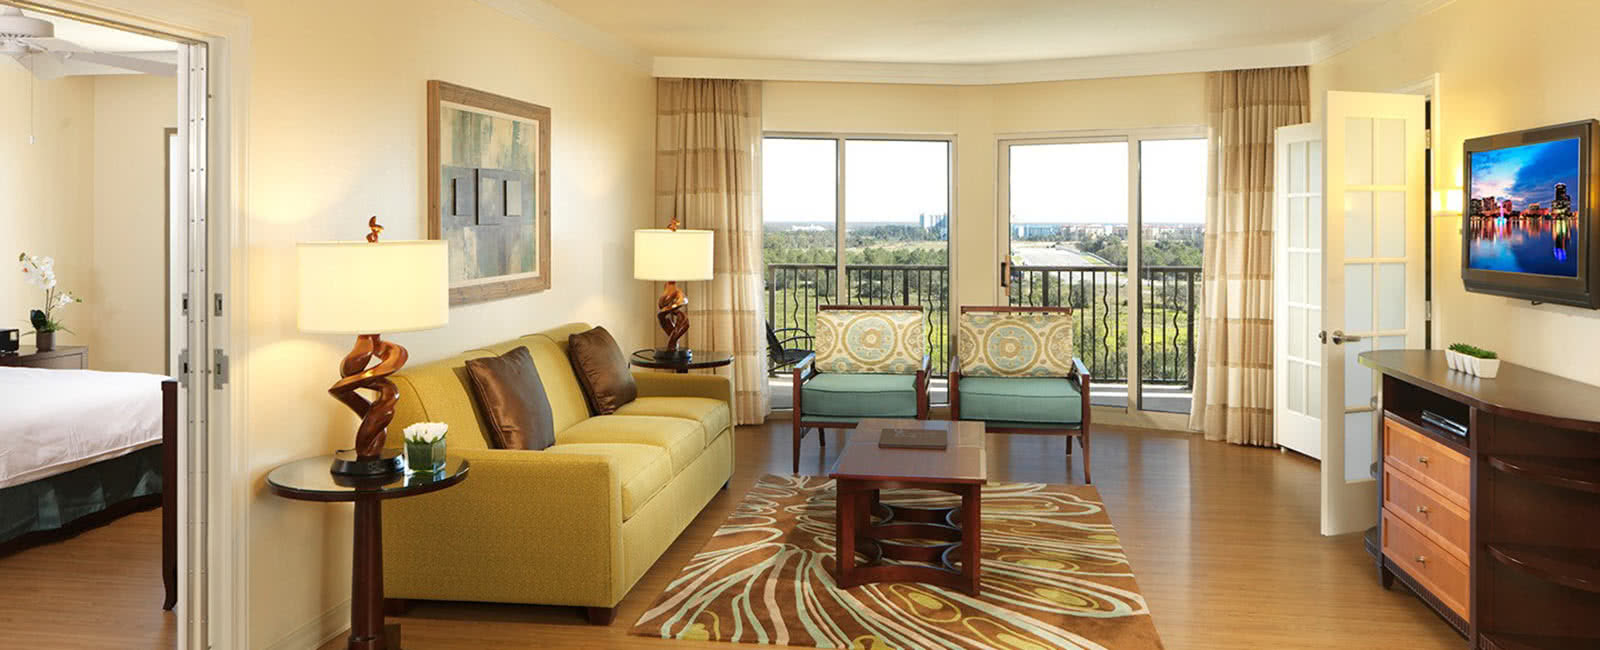 Living Area at Parc Soleil by Hilton Grand Vacations Club in Orlando, Florida